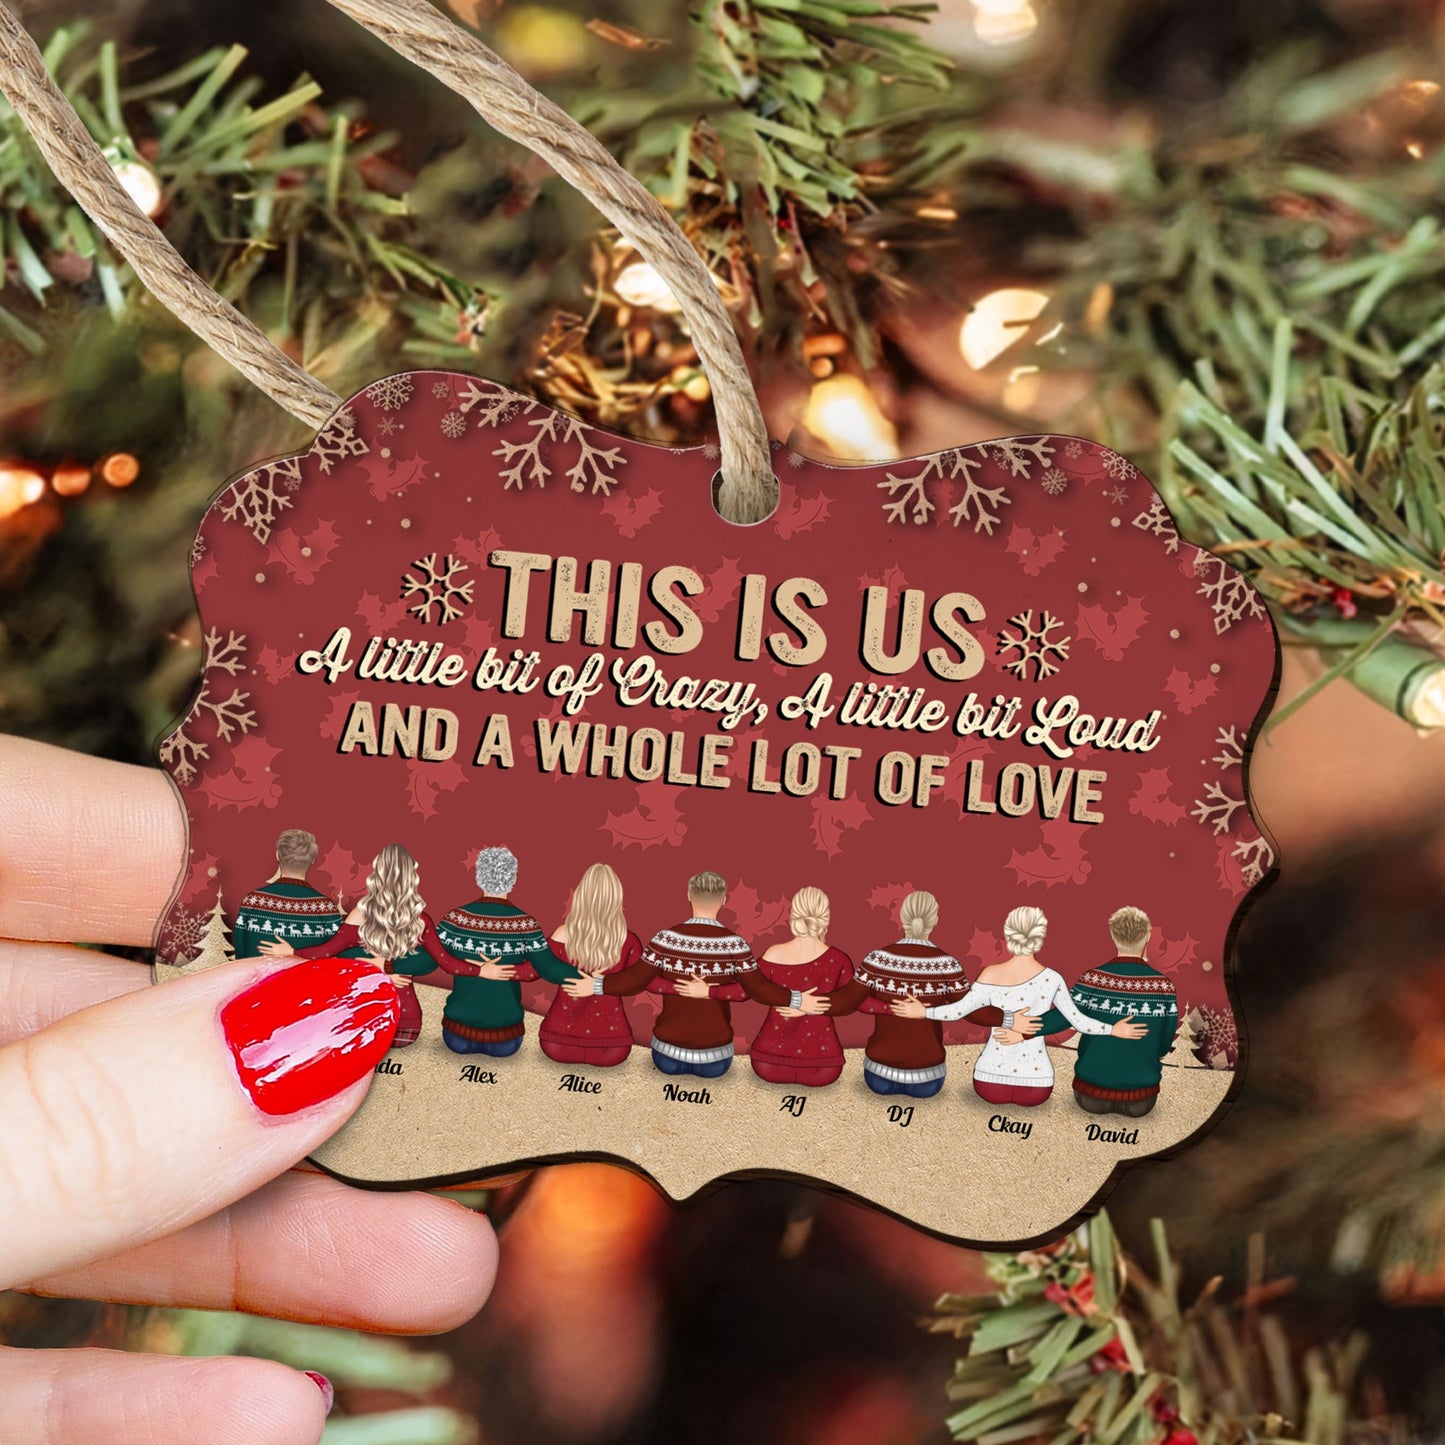 This Is Us A Little Bit Of Crazy - Personalized Wooden/Aluminum Ornament - Up to 10 people - Ver 2